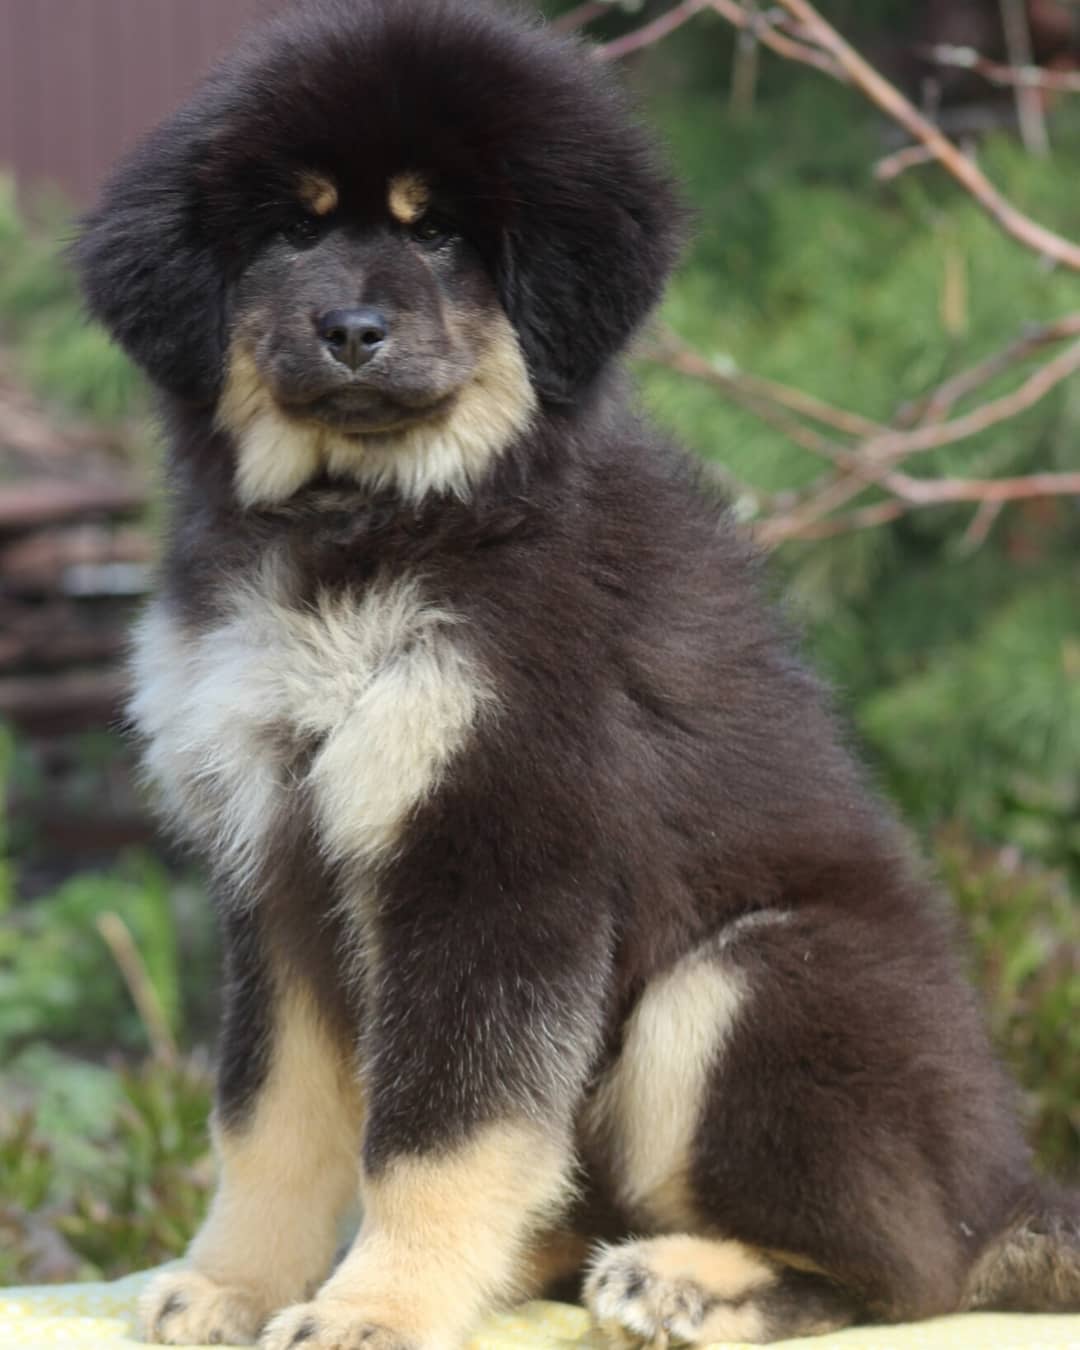 A Tibetan Mastif puppy sitting on top of the table in the garden